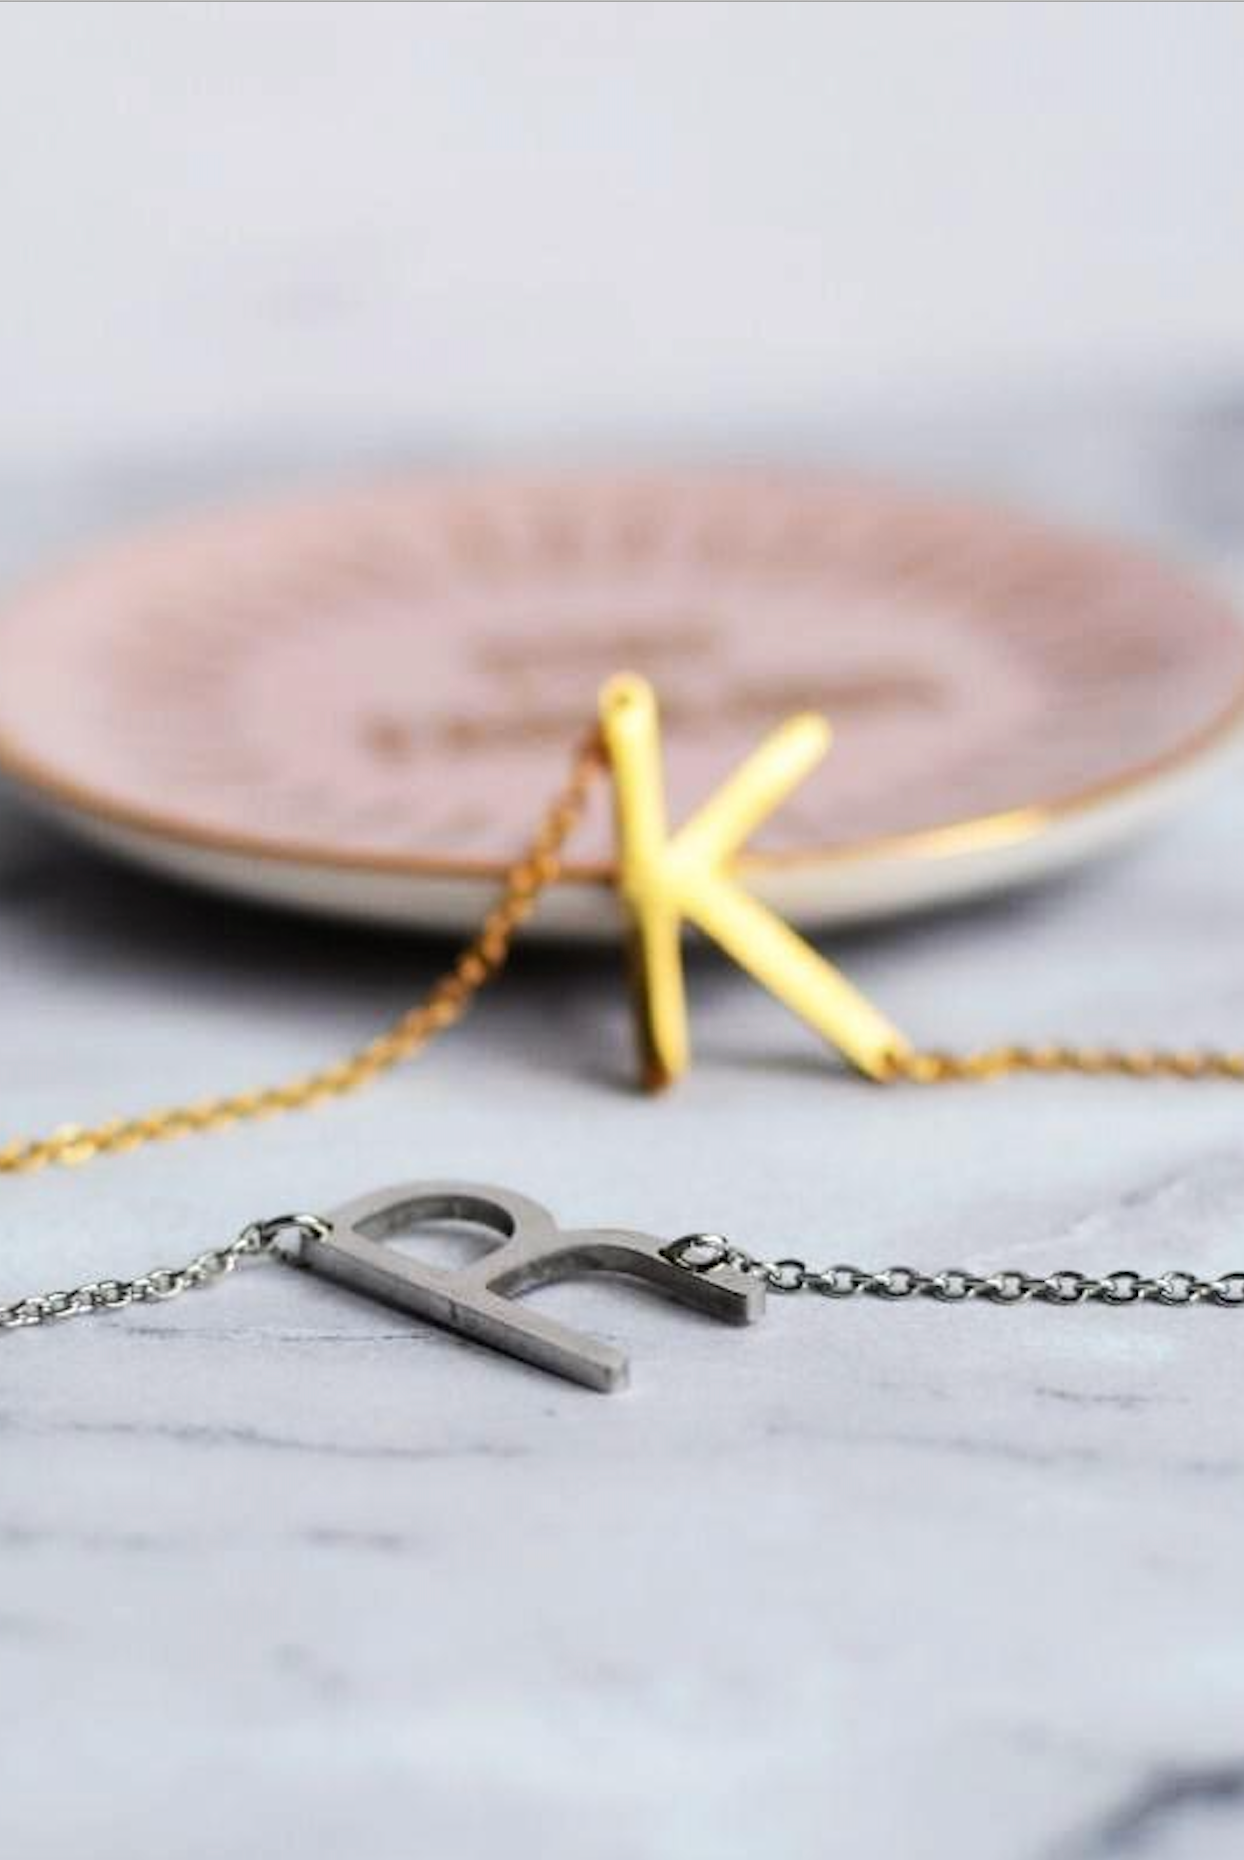 Mini Initial Letter Necklace